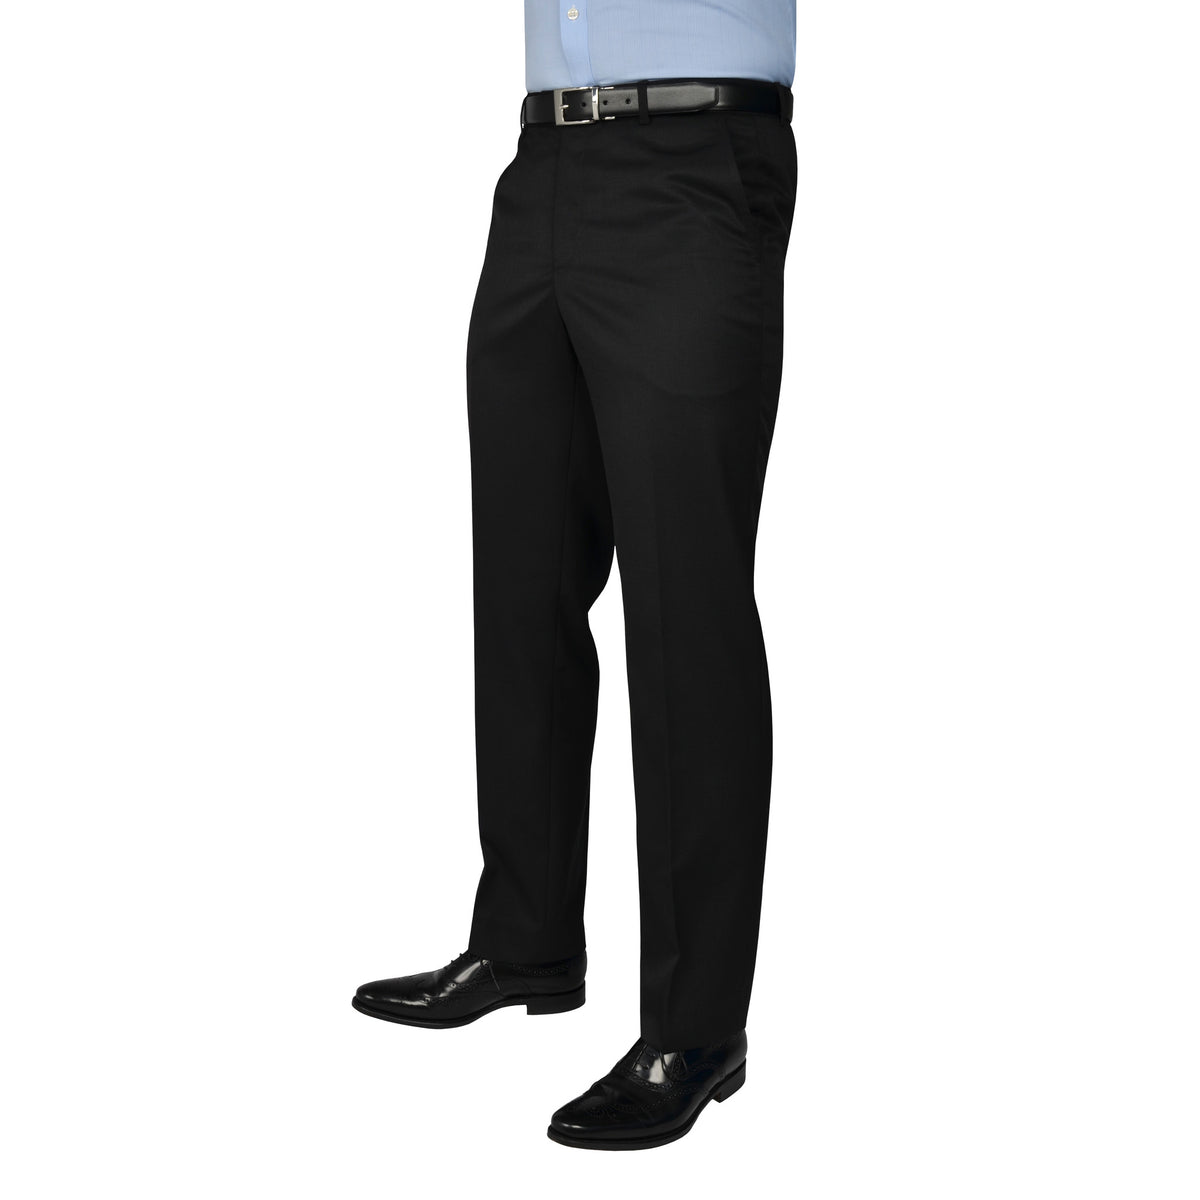 Black Label Trousers Charcoal - peterdrew.com
 - 2